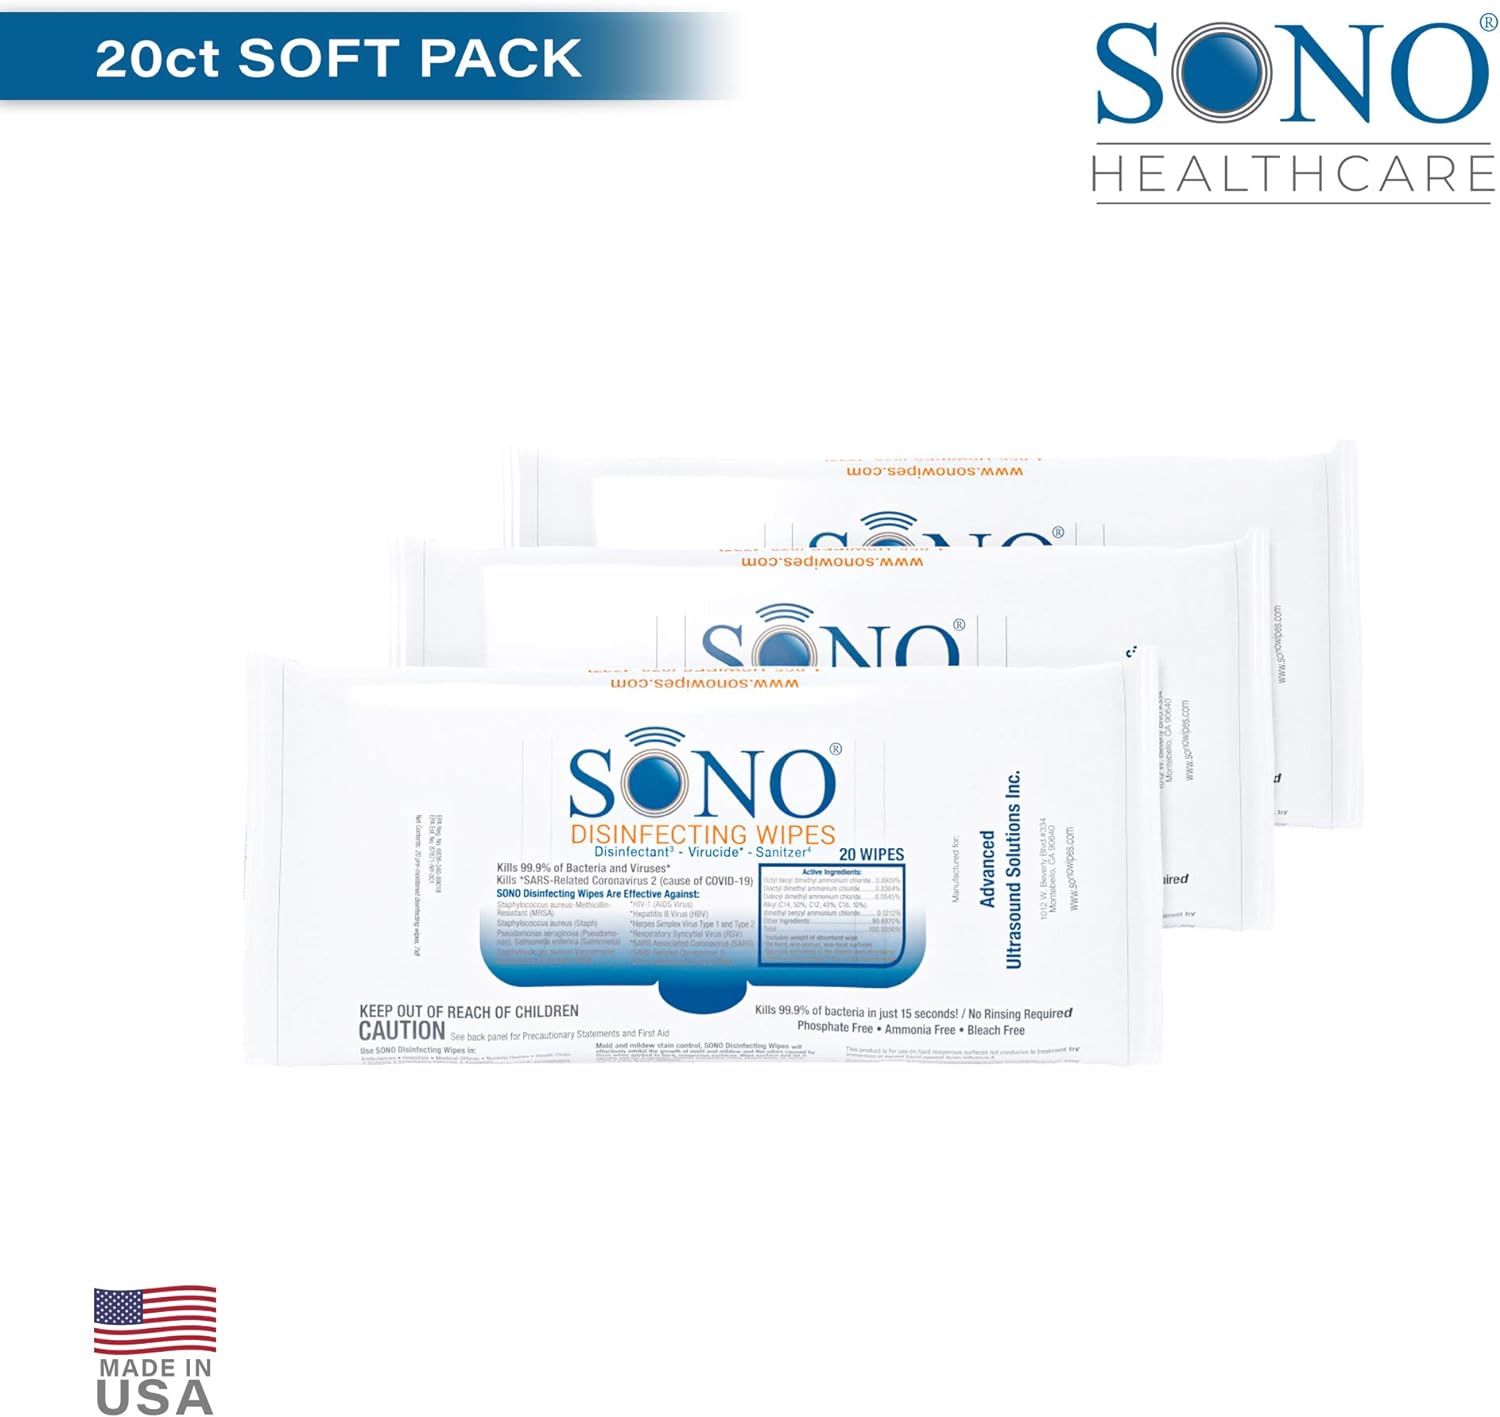 SONO Healthcare - Medical-Grade, Alcohol-Free, Travel Disinfectant Wipes for Schools, Airplanes, Car | Amazon (US)